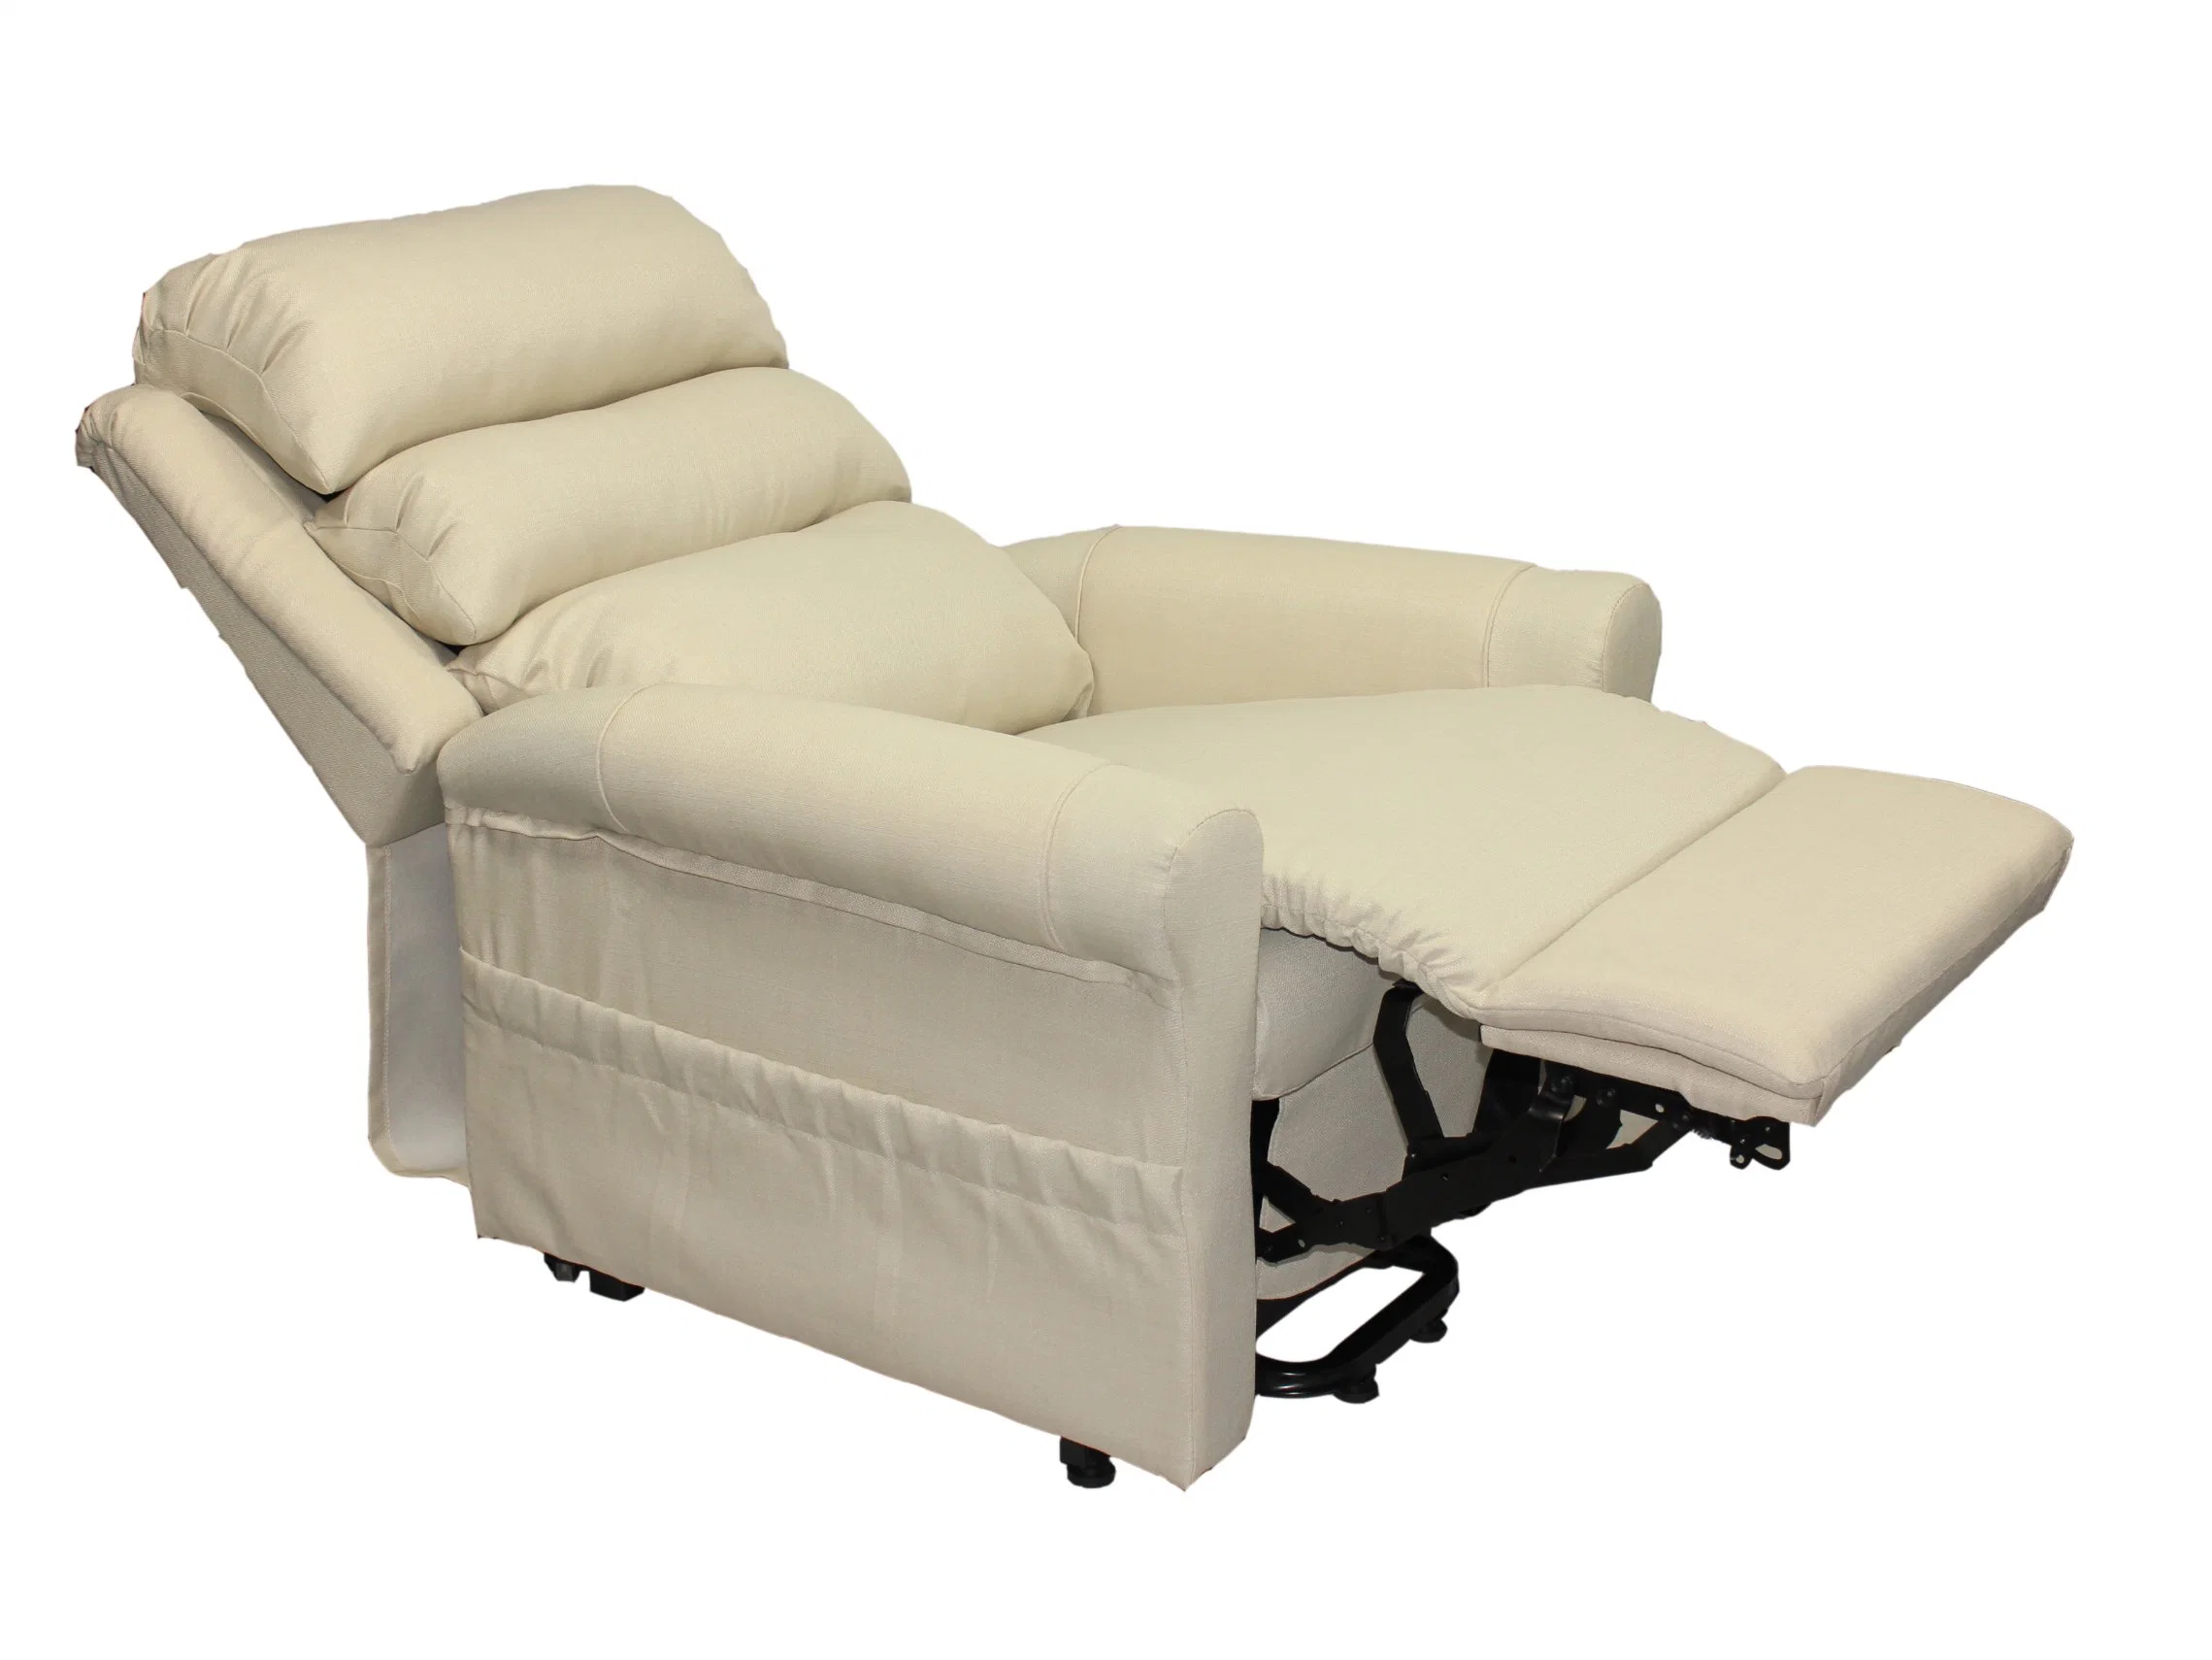 Leisure Lift for Elderly Patient Transfer Mechanism Sofa Chair Furniture Factory